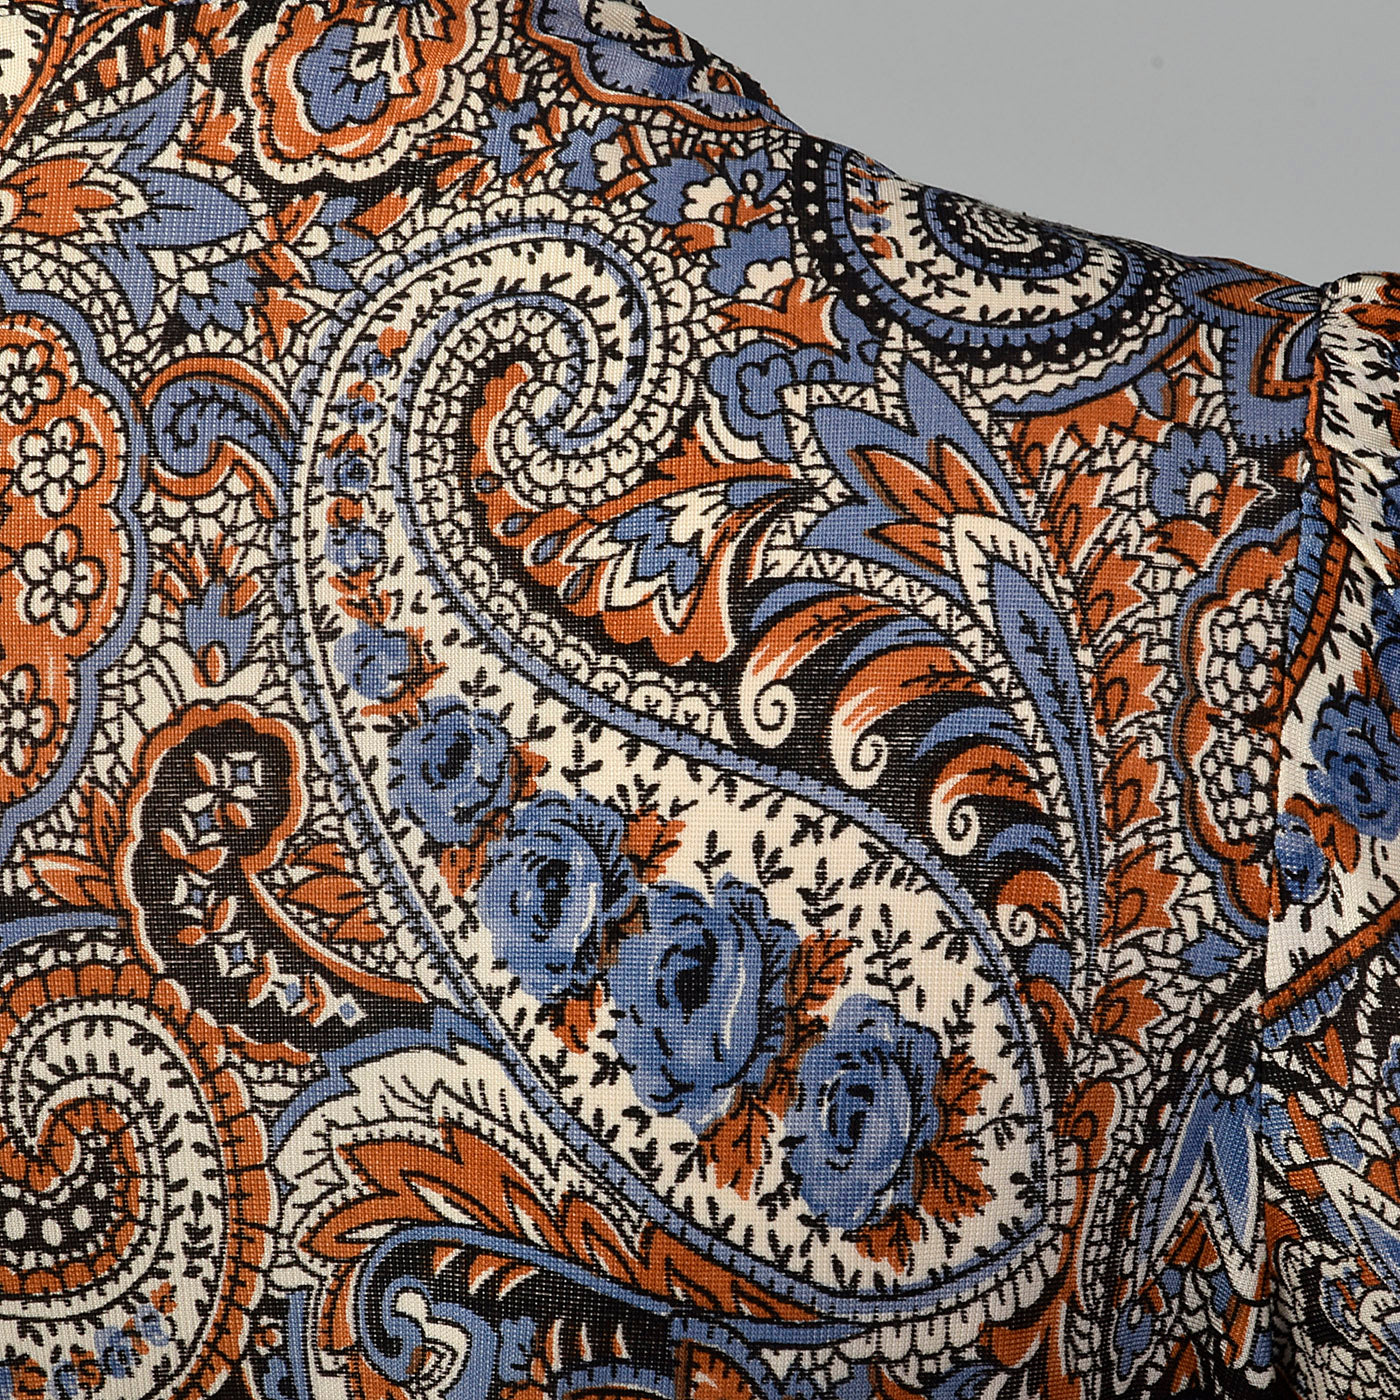 1940s Paisley Print Dress in Jersey Knit